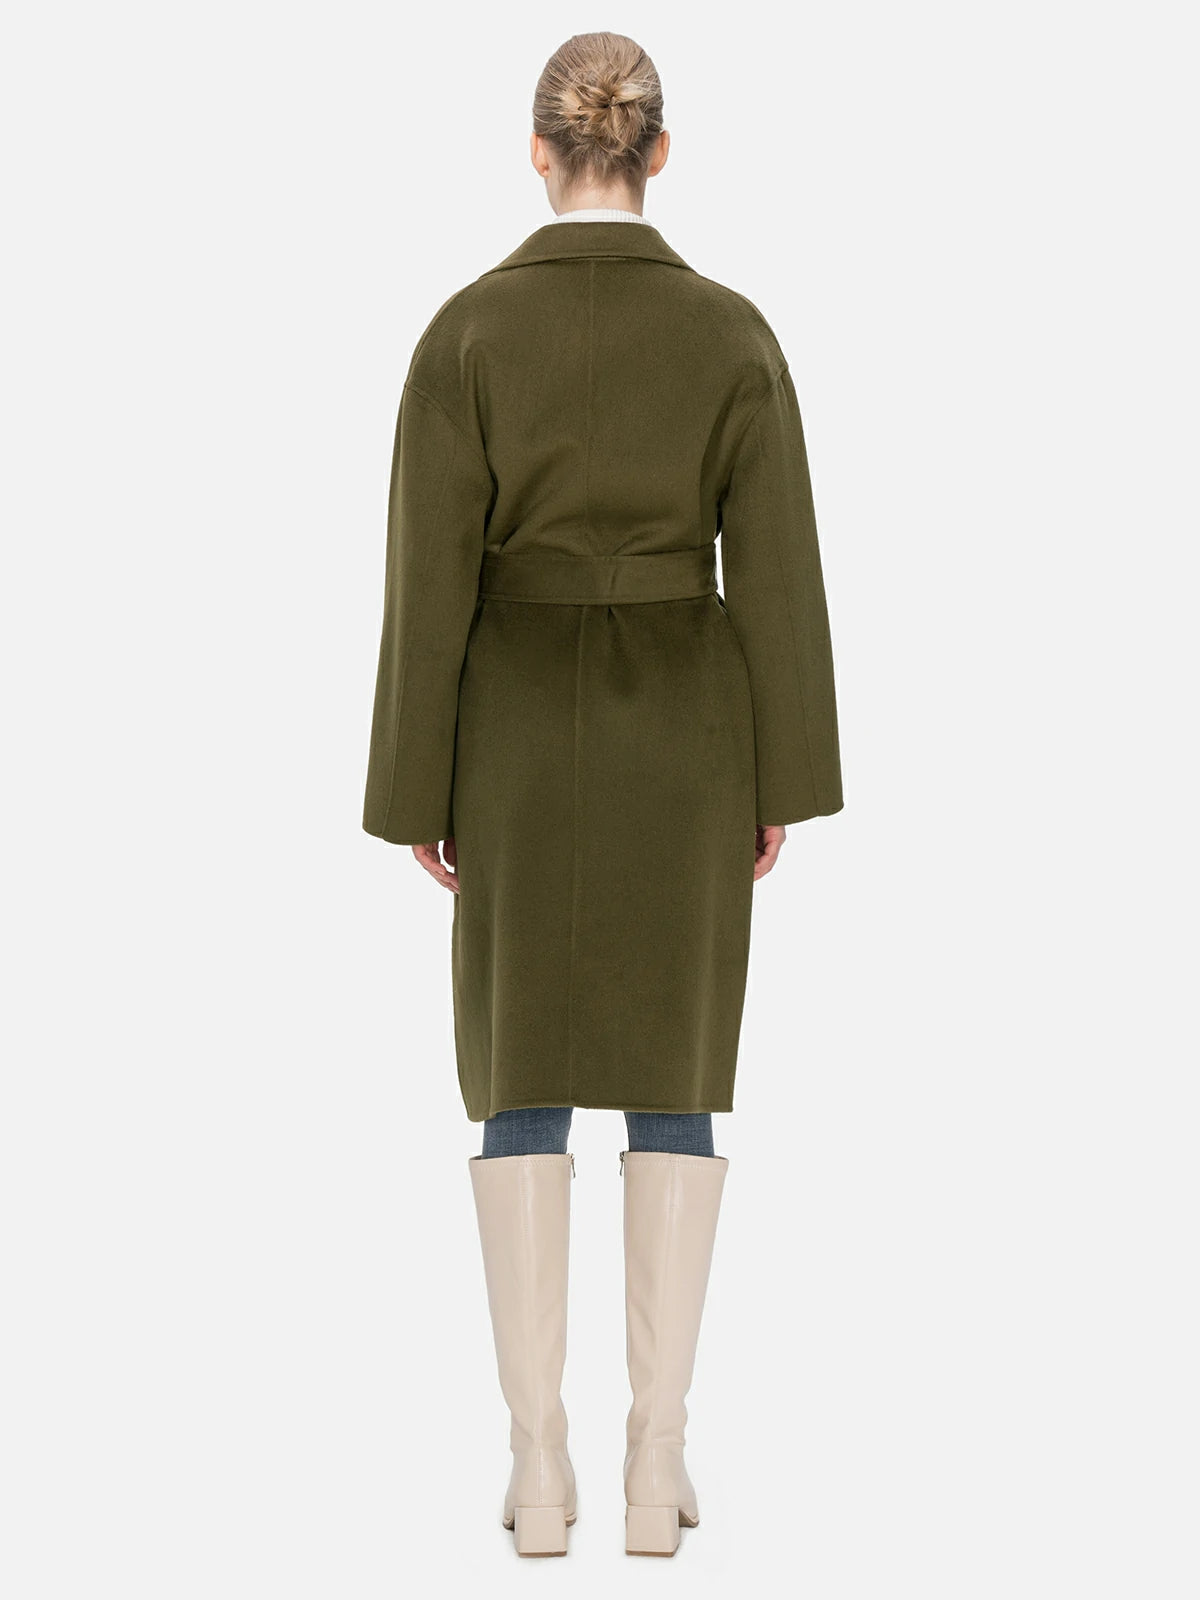 Redefine your outerwear collection with this elegant deep olive green wool coat, showcasing a lapel and belt design, concealed button details, and a mid-length silhouette.